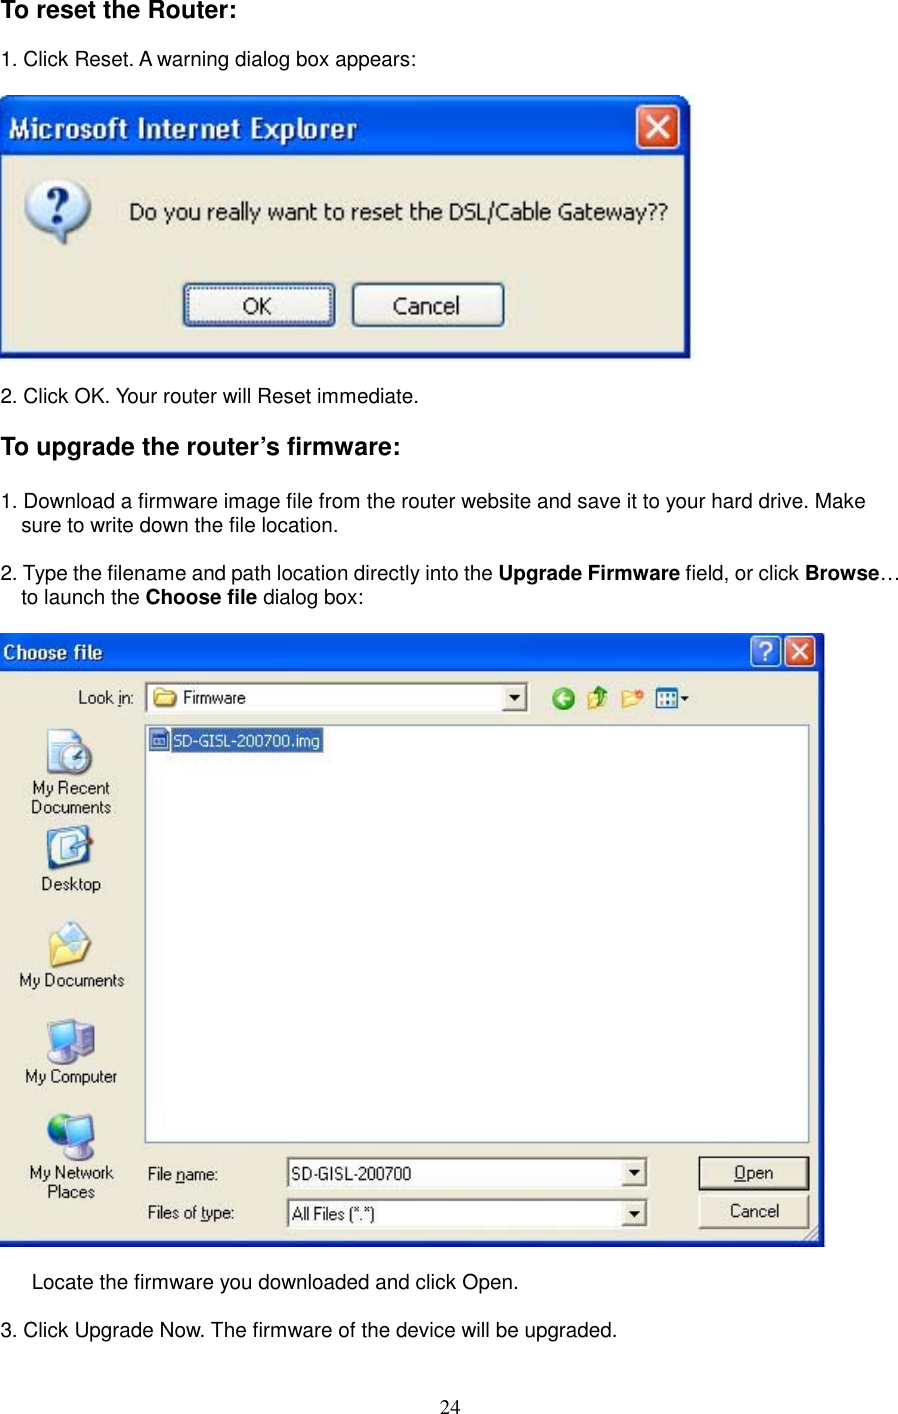  24To reset the Router:  1. Click Reset. A warning dialog box appears:      2. Click OK. Your router will Reset immediate.  To upgrade the router’s firmware:  1. Download a firmware image file from the router website and save it to your hard drive. Make sure to write down the file location.  2. Type the filename and path location directly into the Upgrade Firmware field, or click Browse… to launch the Choose file dialog box:      Locate the firmware you downloaded and click Open.  3. Click Upgrade Now. The firmware of the device will be upgraded.   